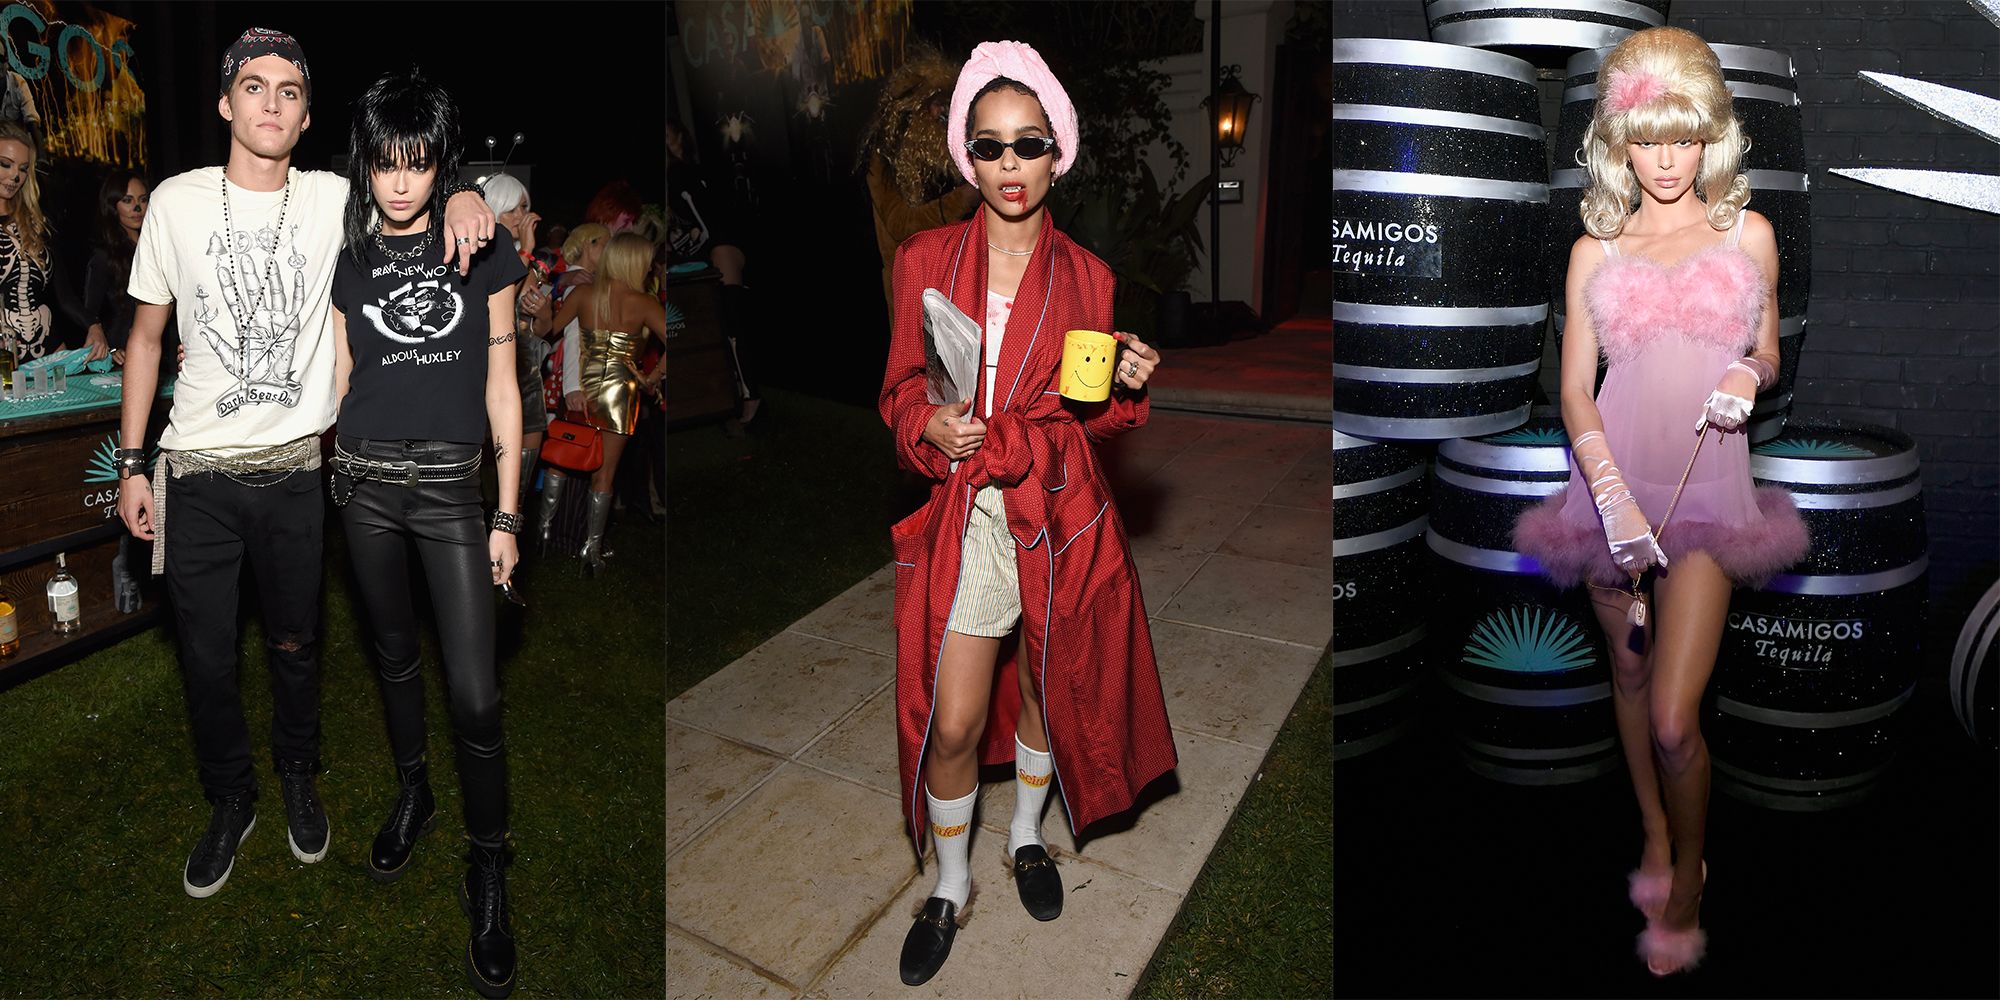 Halloween 2018: Celebrity costumes and parties